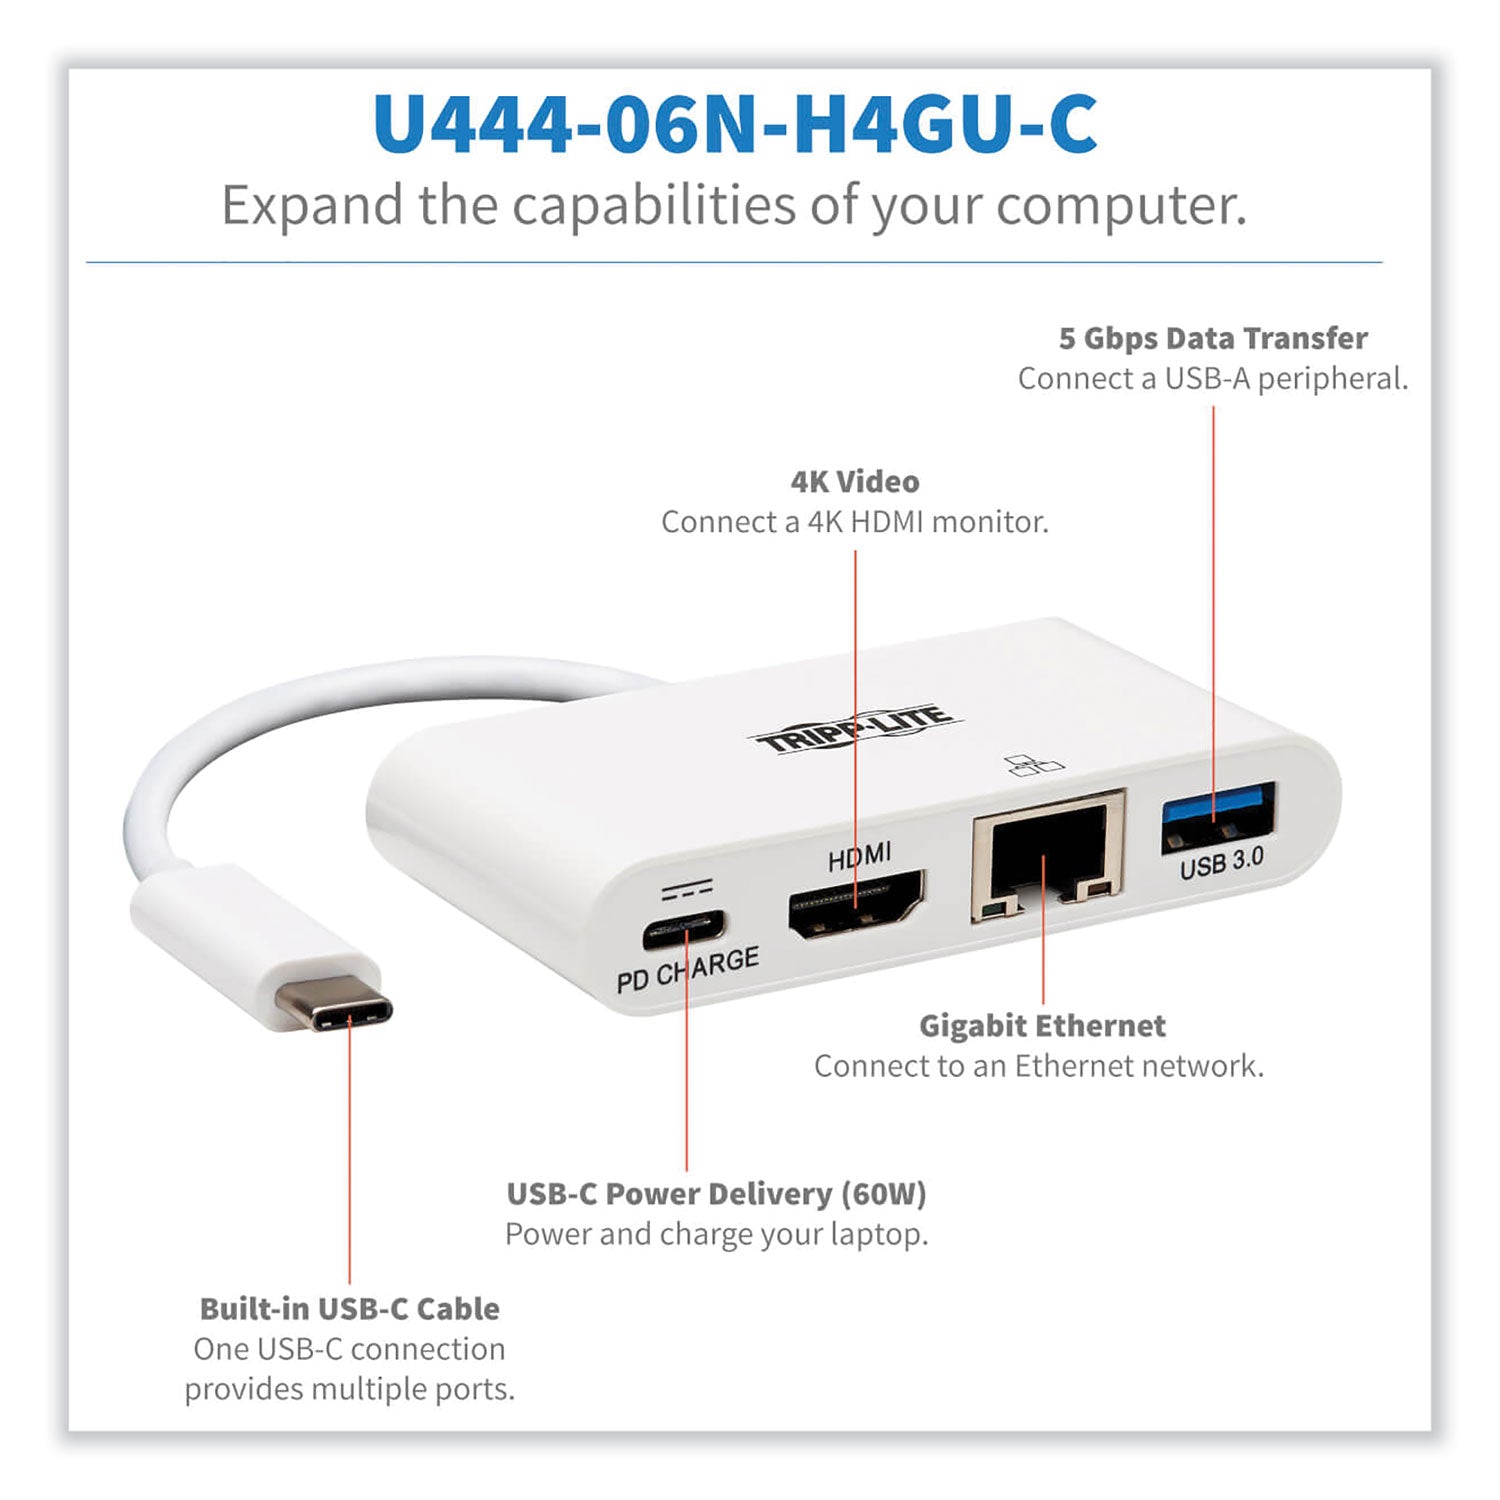 4k-dock-with-charging-and-ethernet-usb-c-4k-hdmi-usb-a-pd-charging-white_trpu44406nh4guc - 3